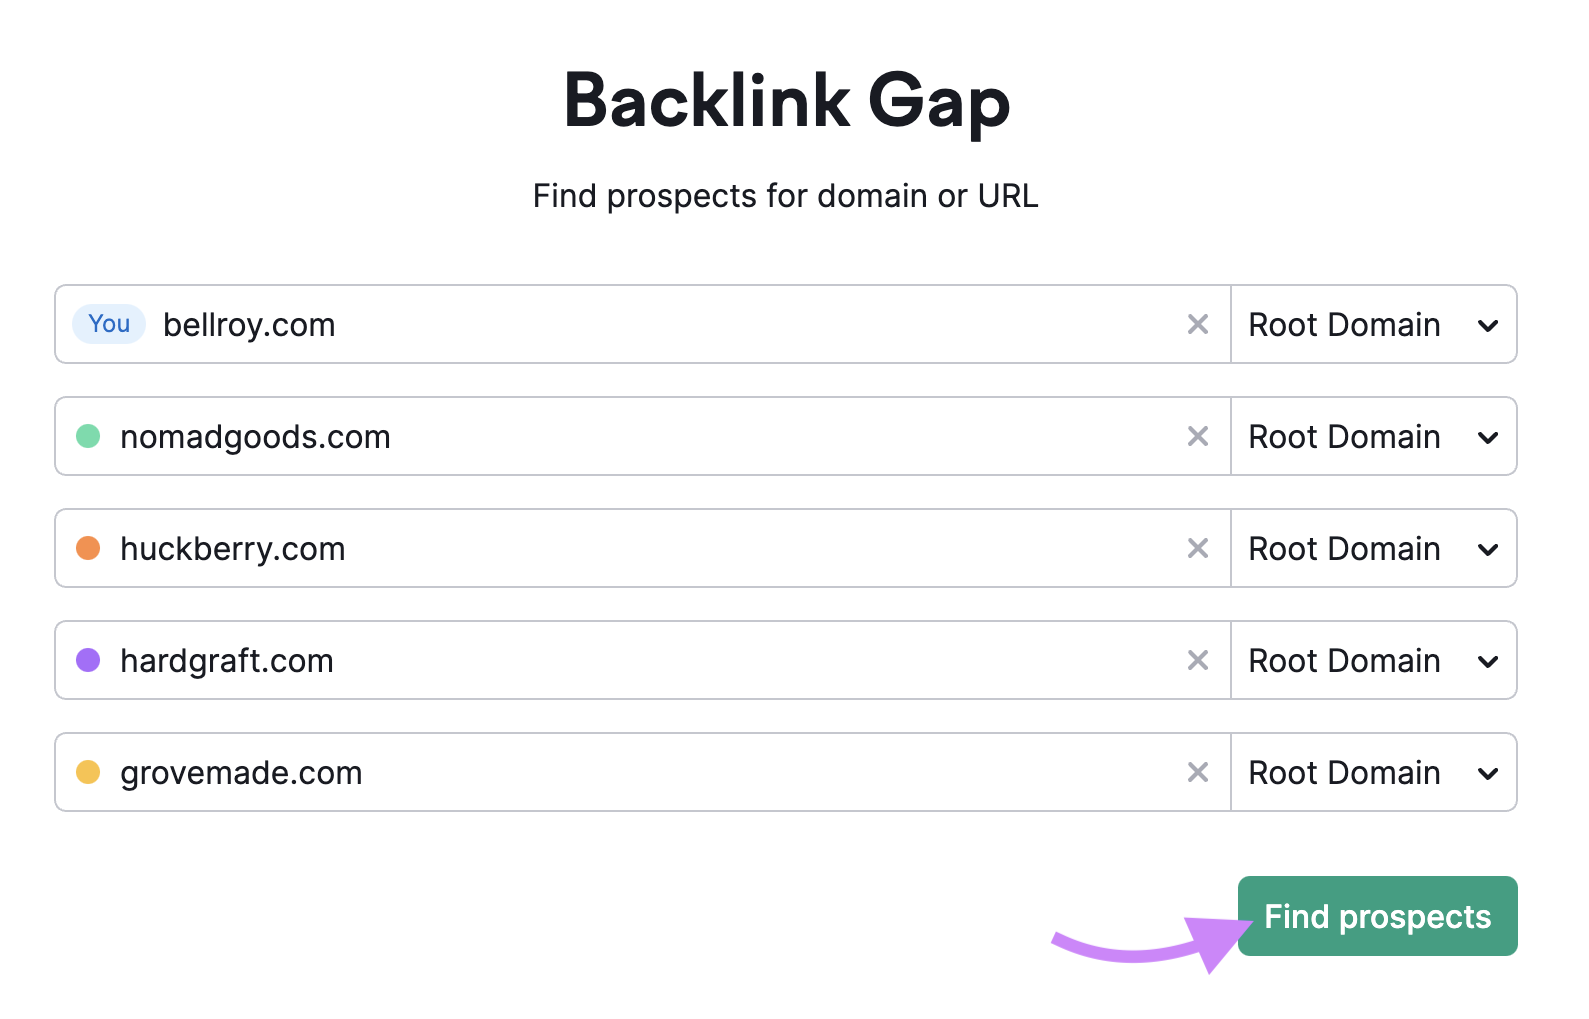 "bellroy.com" and competitors domains entered into the Backlink Gap tool